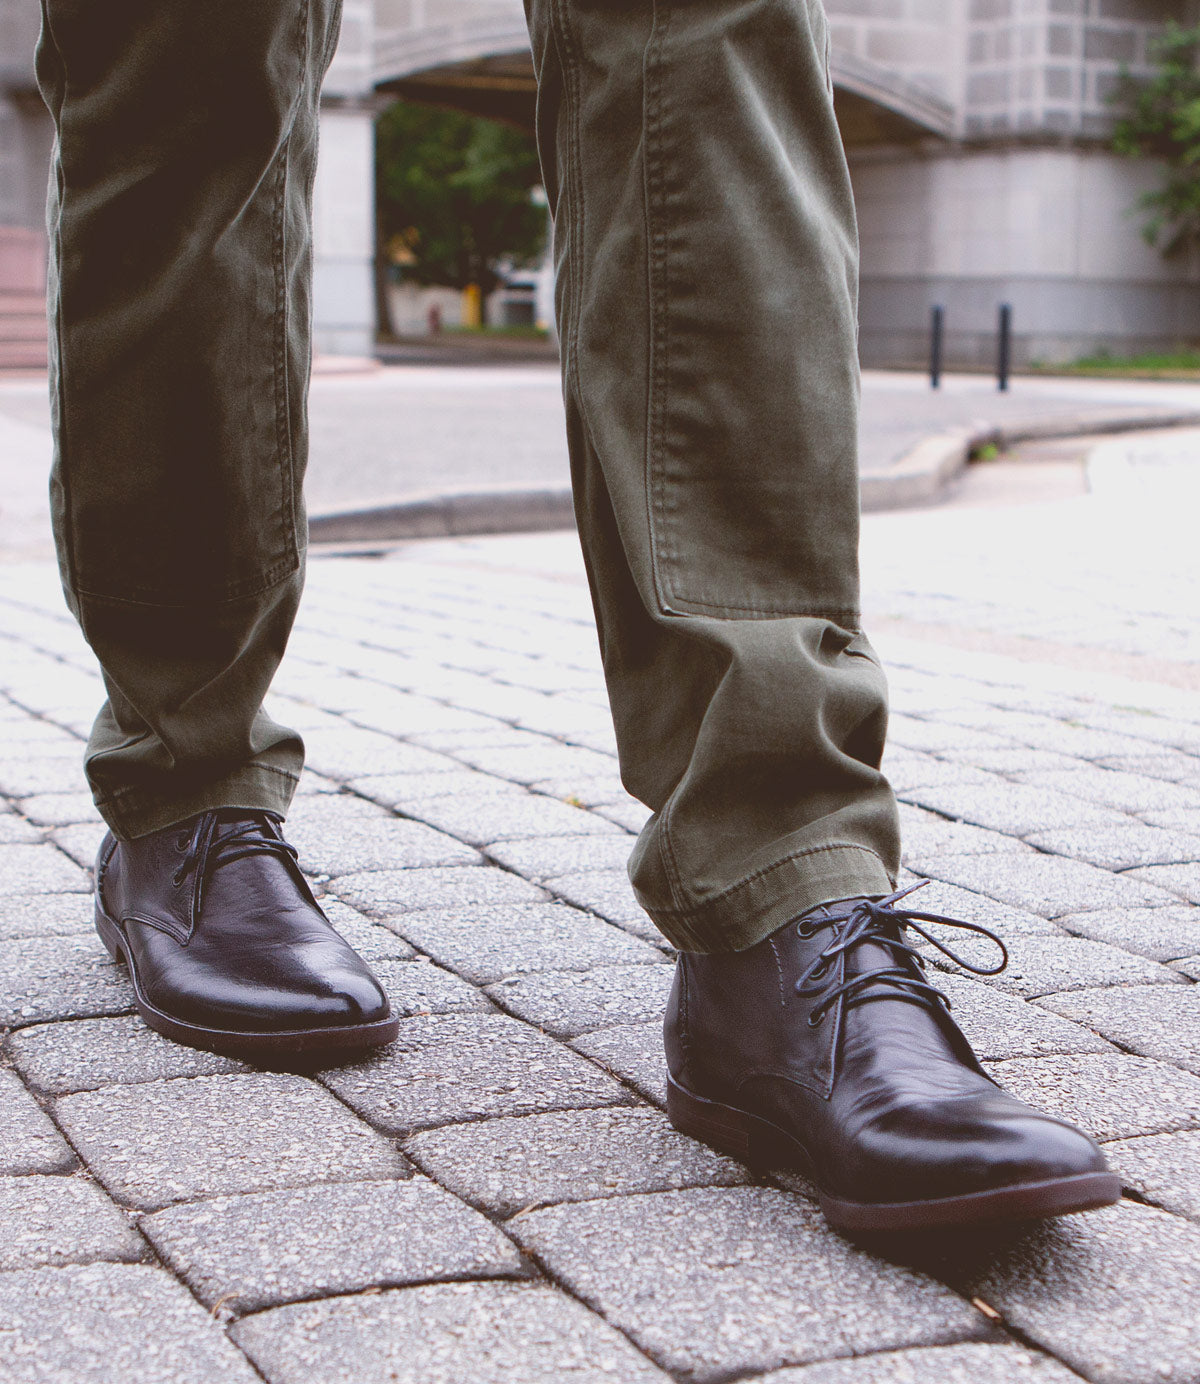 Close-up view of a person wearing green pants and black leather chukka boots with a newly developed outsole, Illiad by Bed Stu, standing on a cobblestone street.